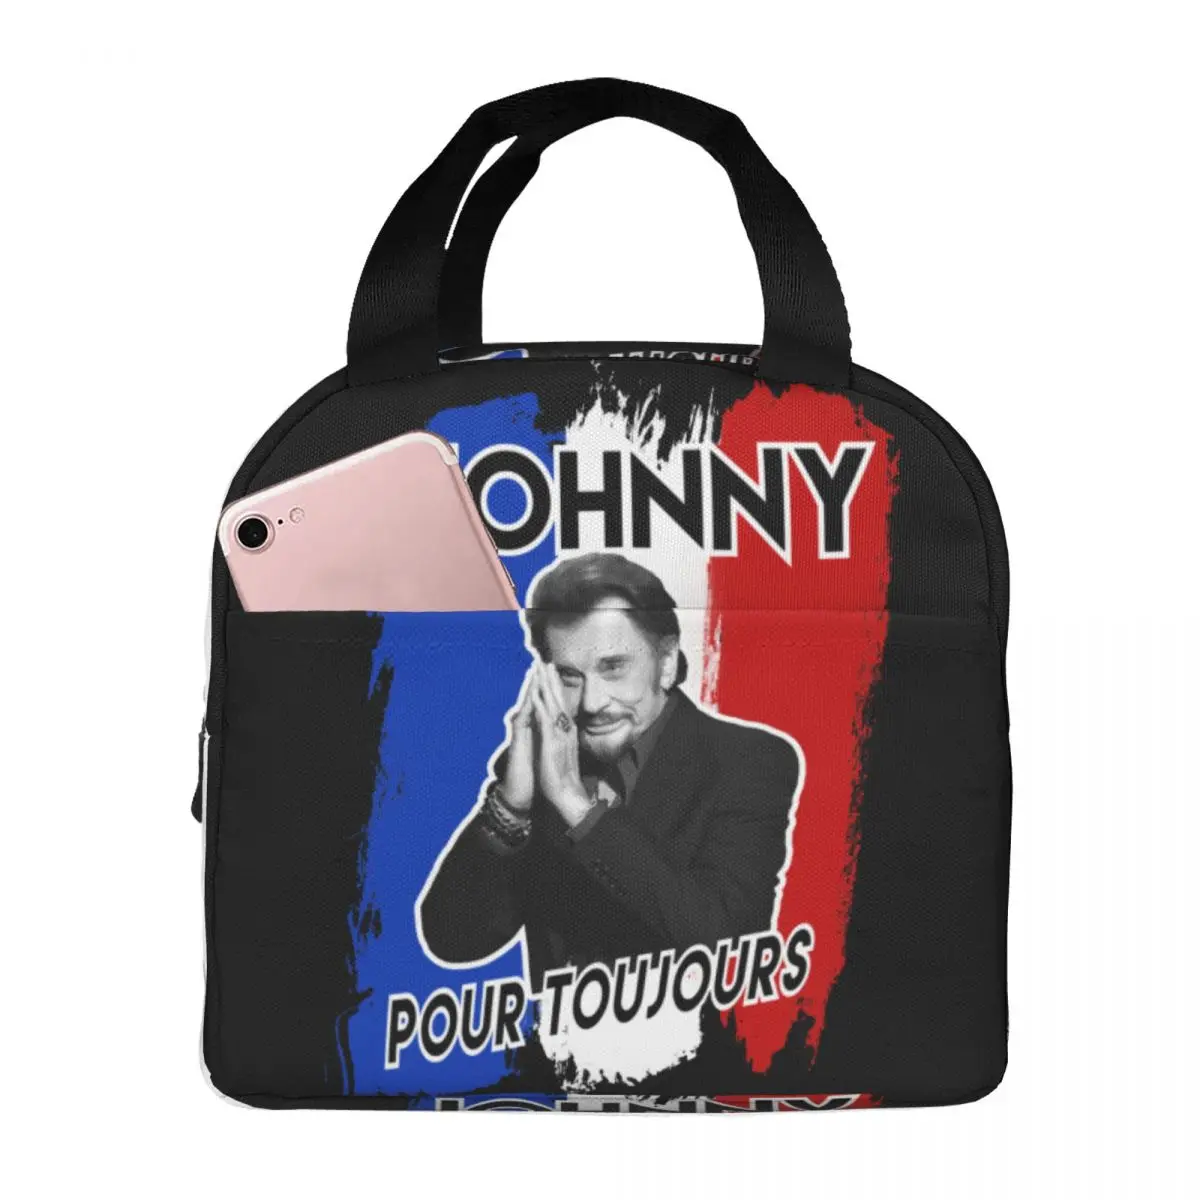 Johnny Hallyday Forever Lunch Bag Portable Insulated Canvas Cooler Bags Rock Music Thermal Picnic Tote for Women Children